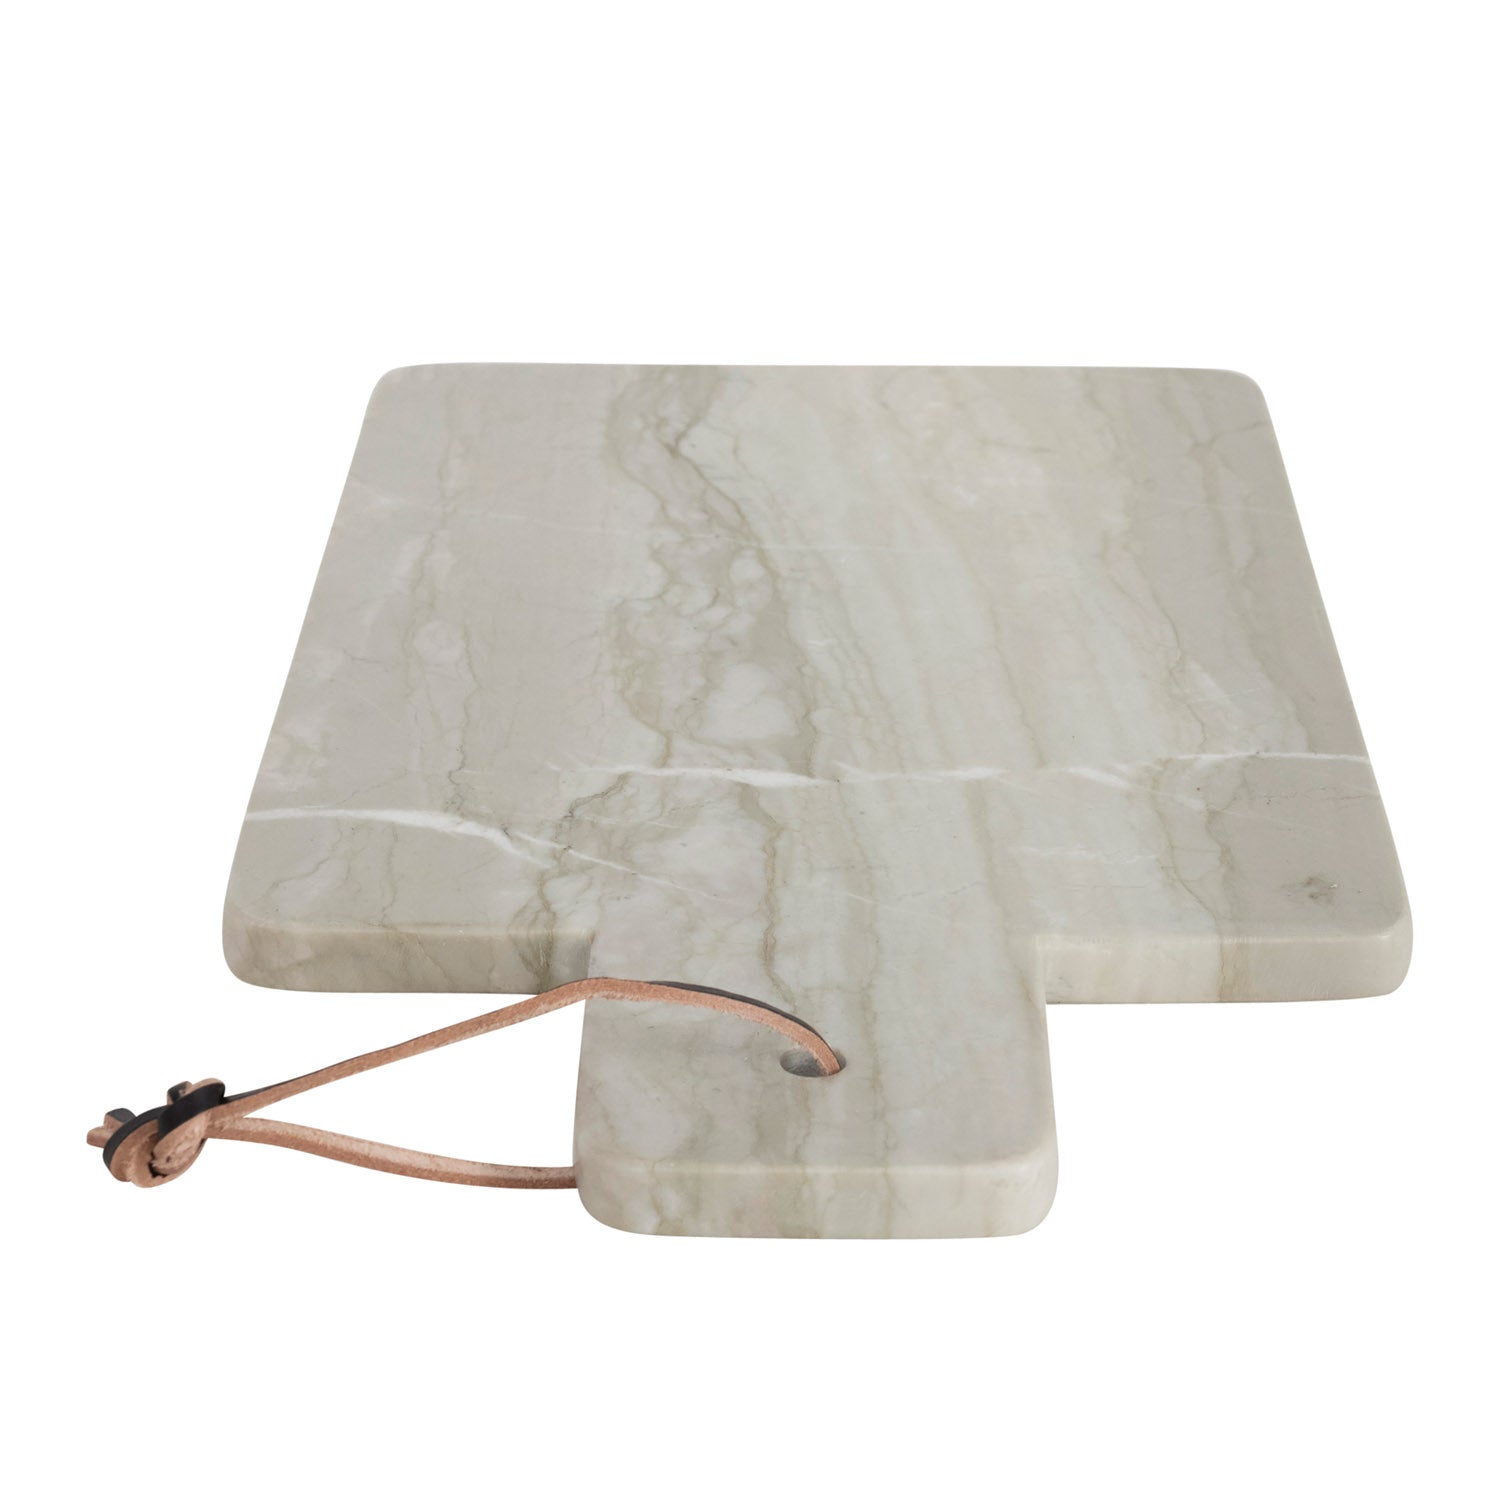 Marble Cheeseboard With Leather Tie